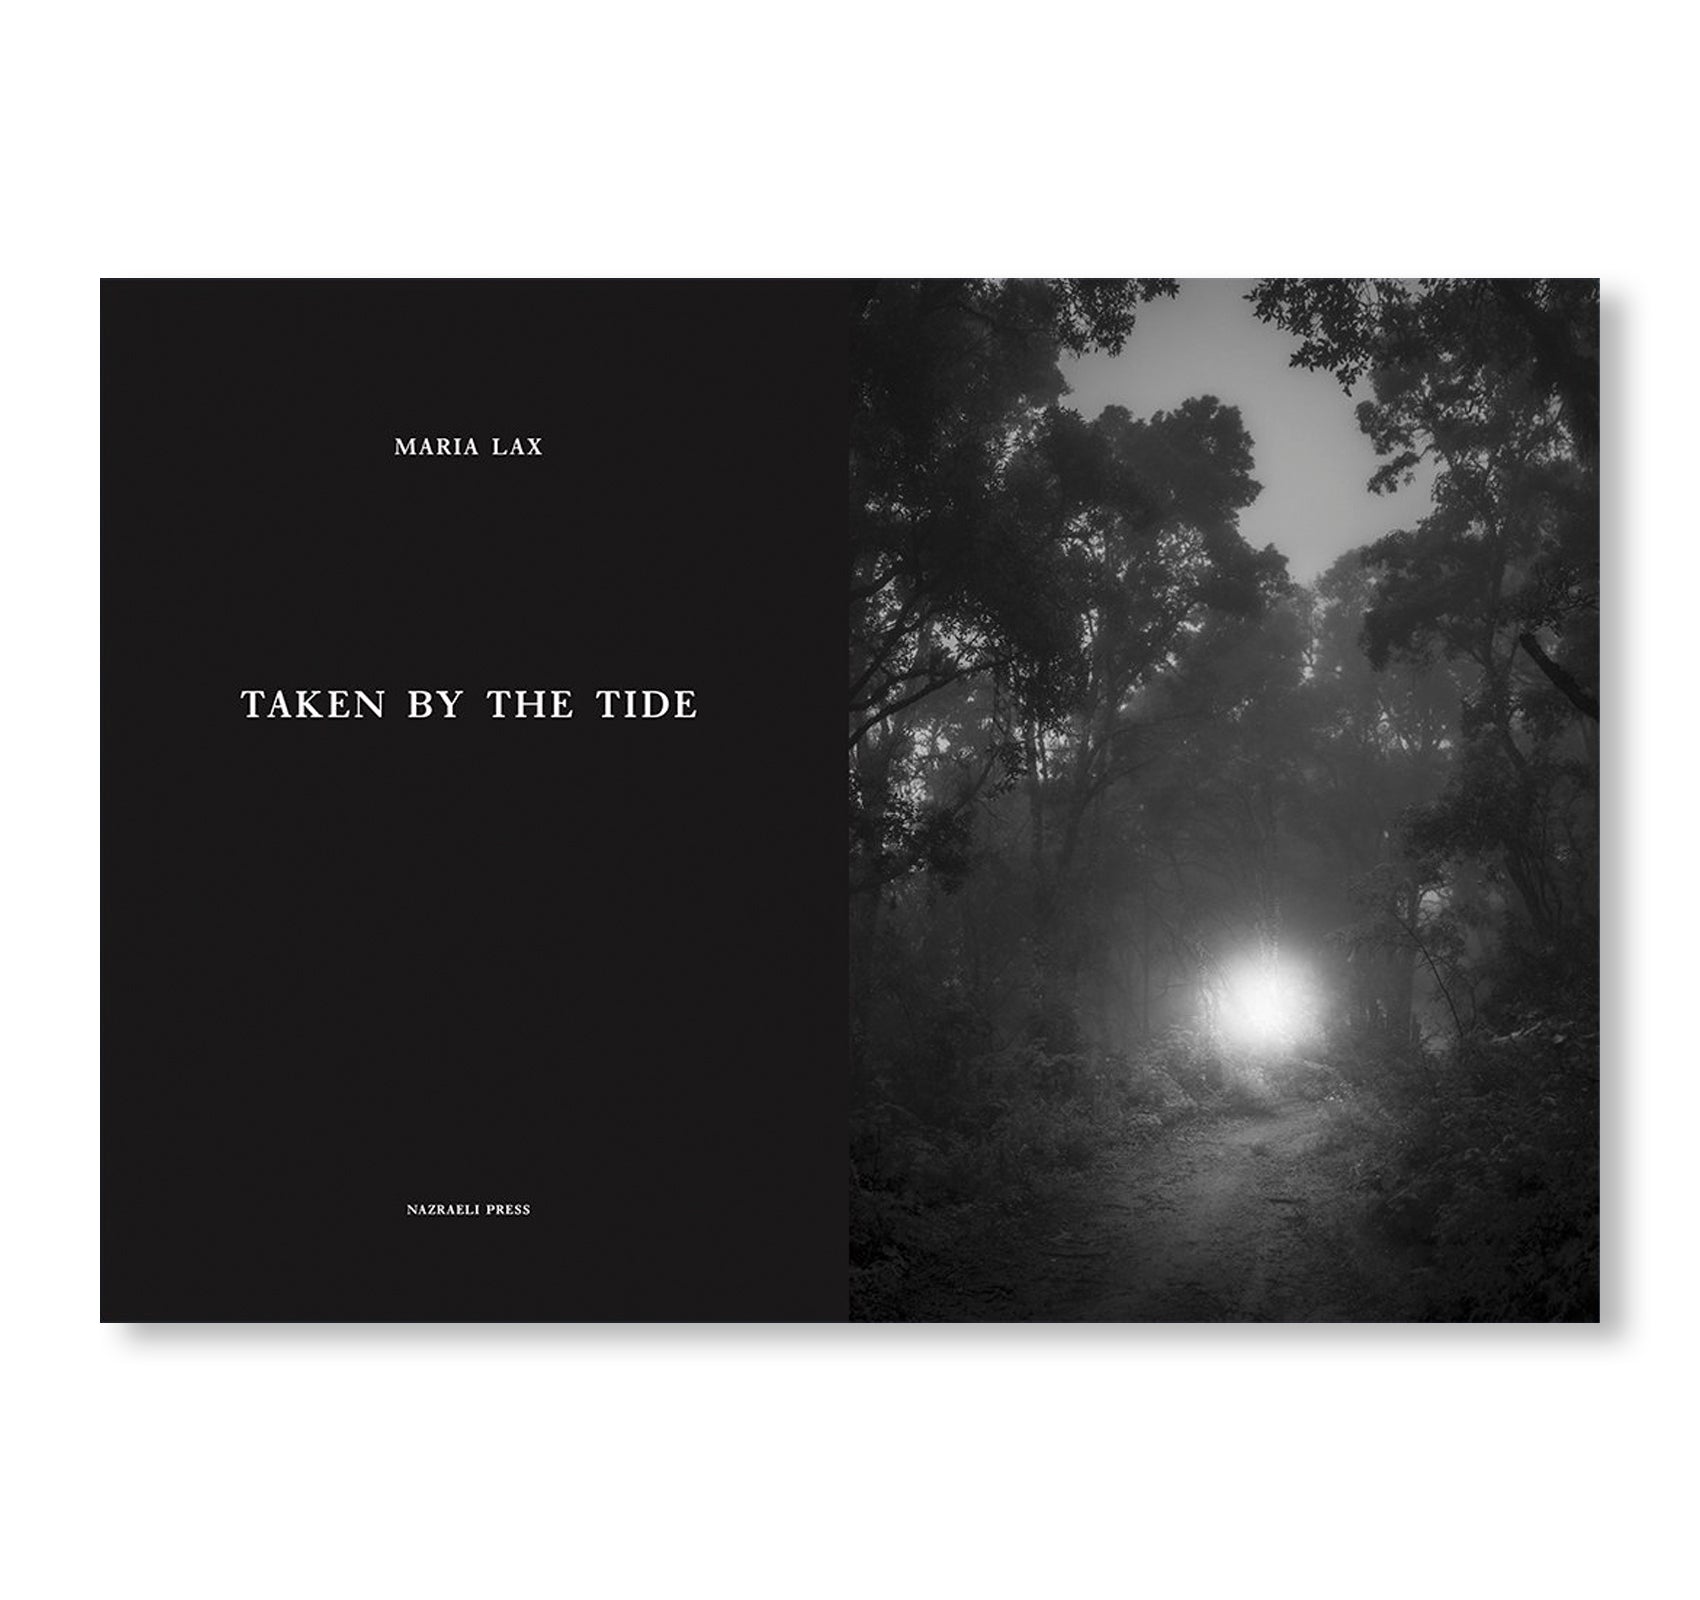 ONE PICTURE BOOK TWO #36: TAKEN BY THE TIDE by Maria Lax